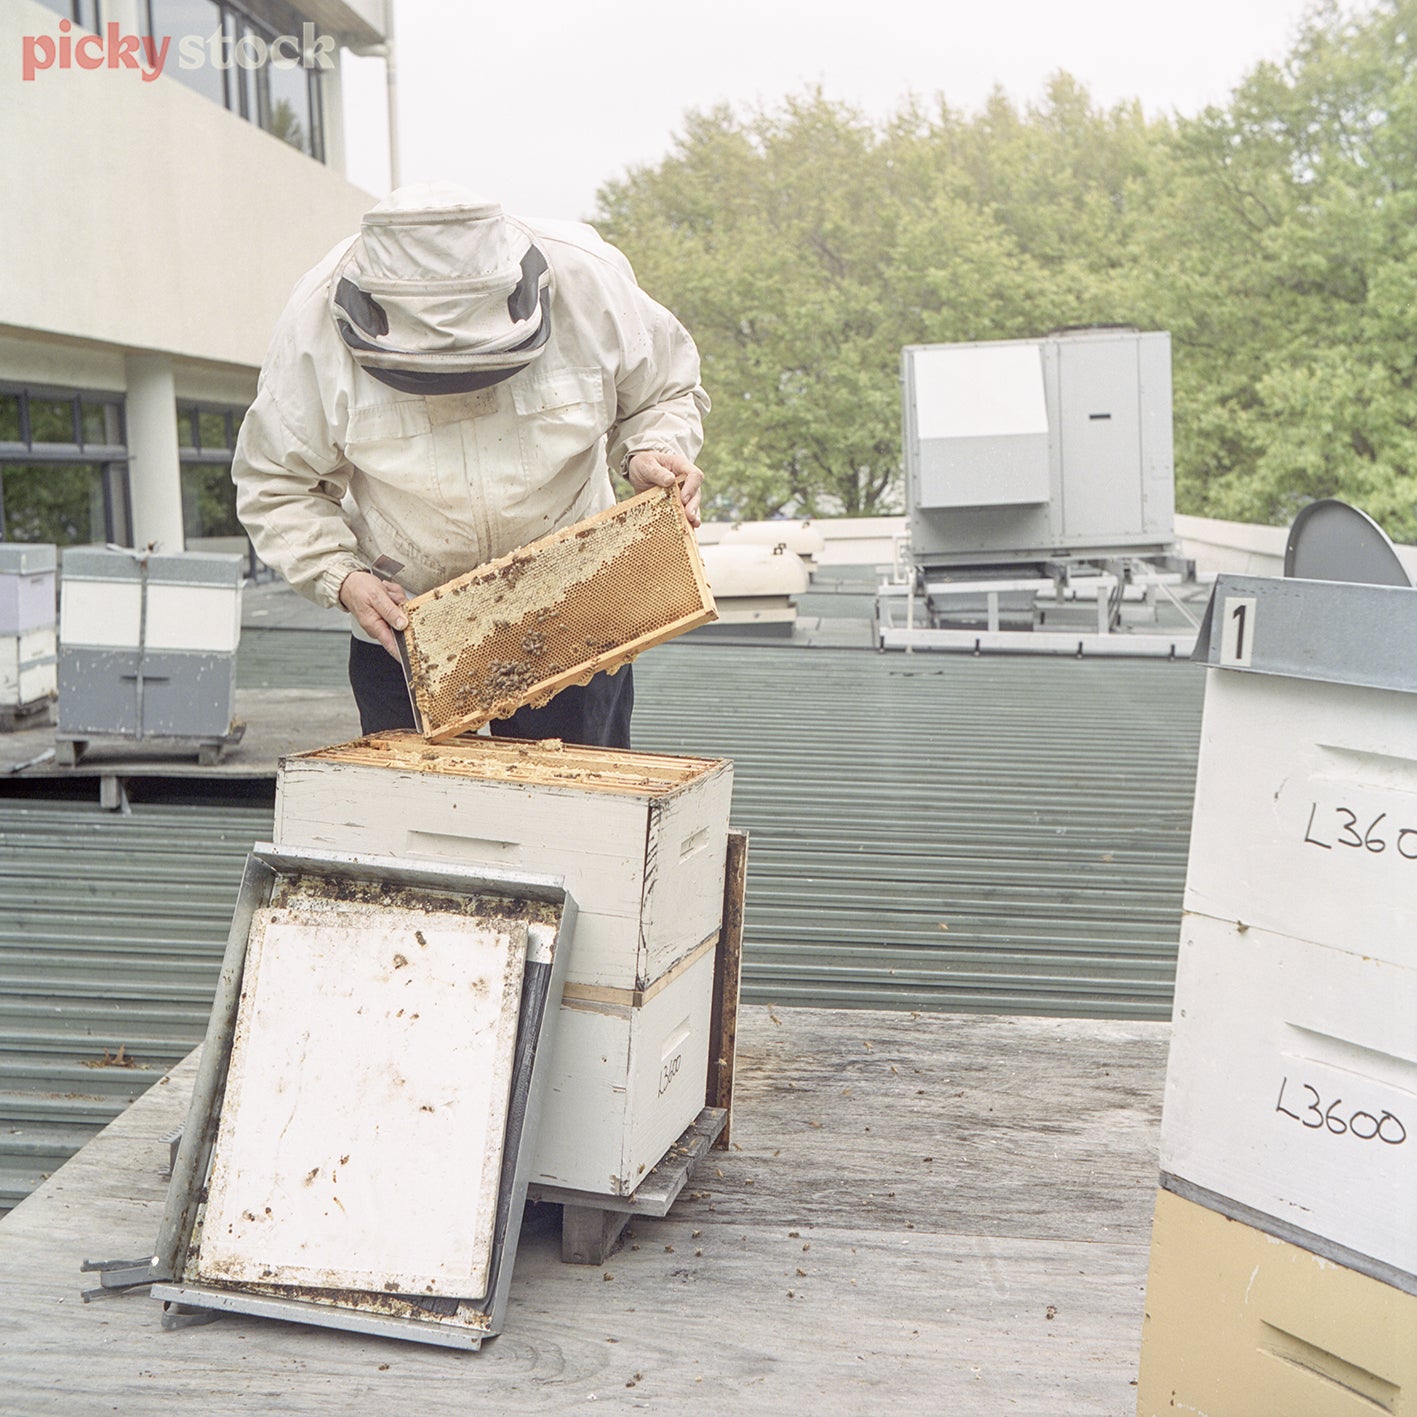 Single beekeeper on roof, checking hives in city. Not wearing gloves. A large air conditioning unit and other small boxed hives in the background. 